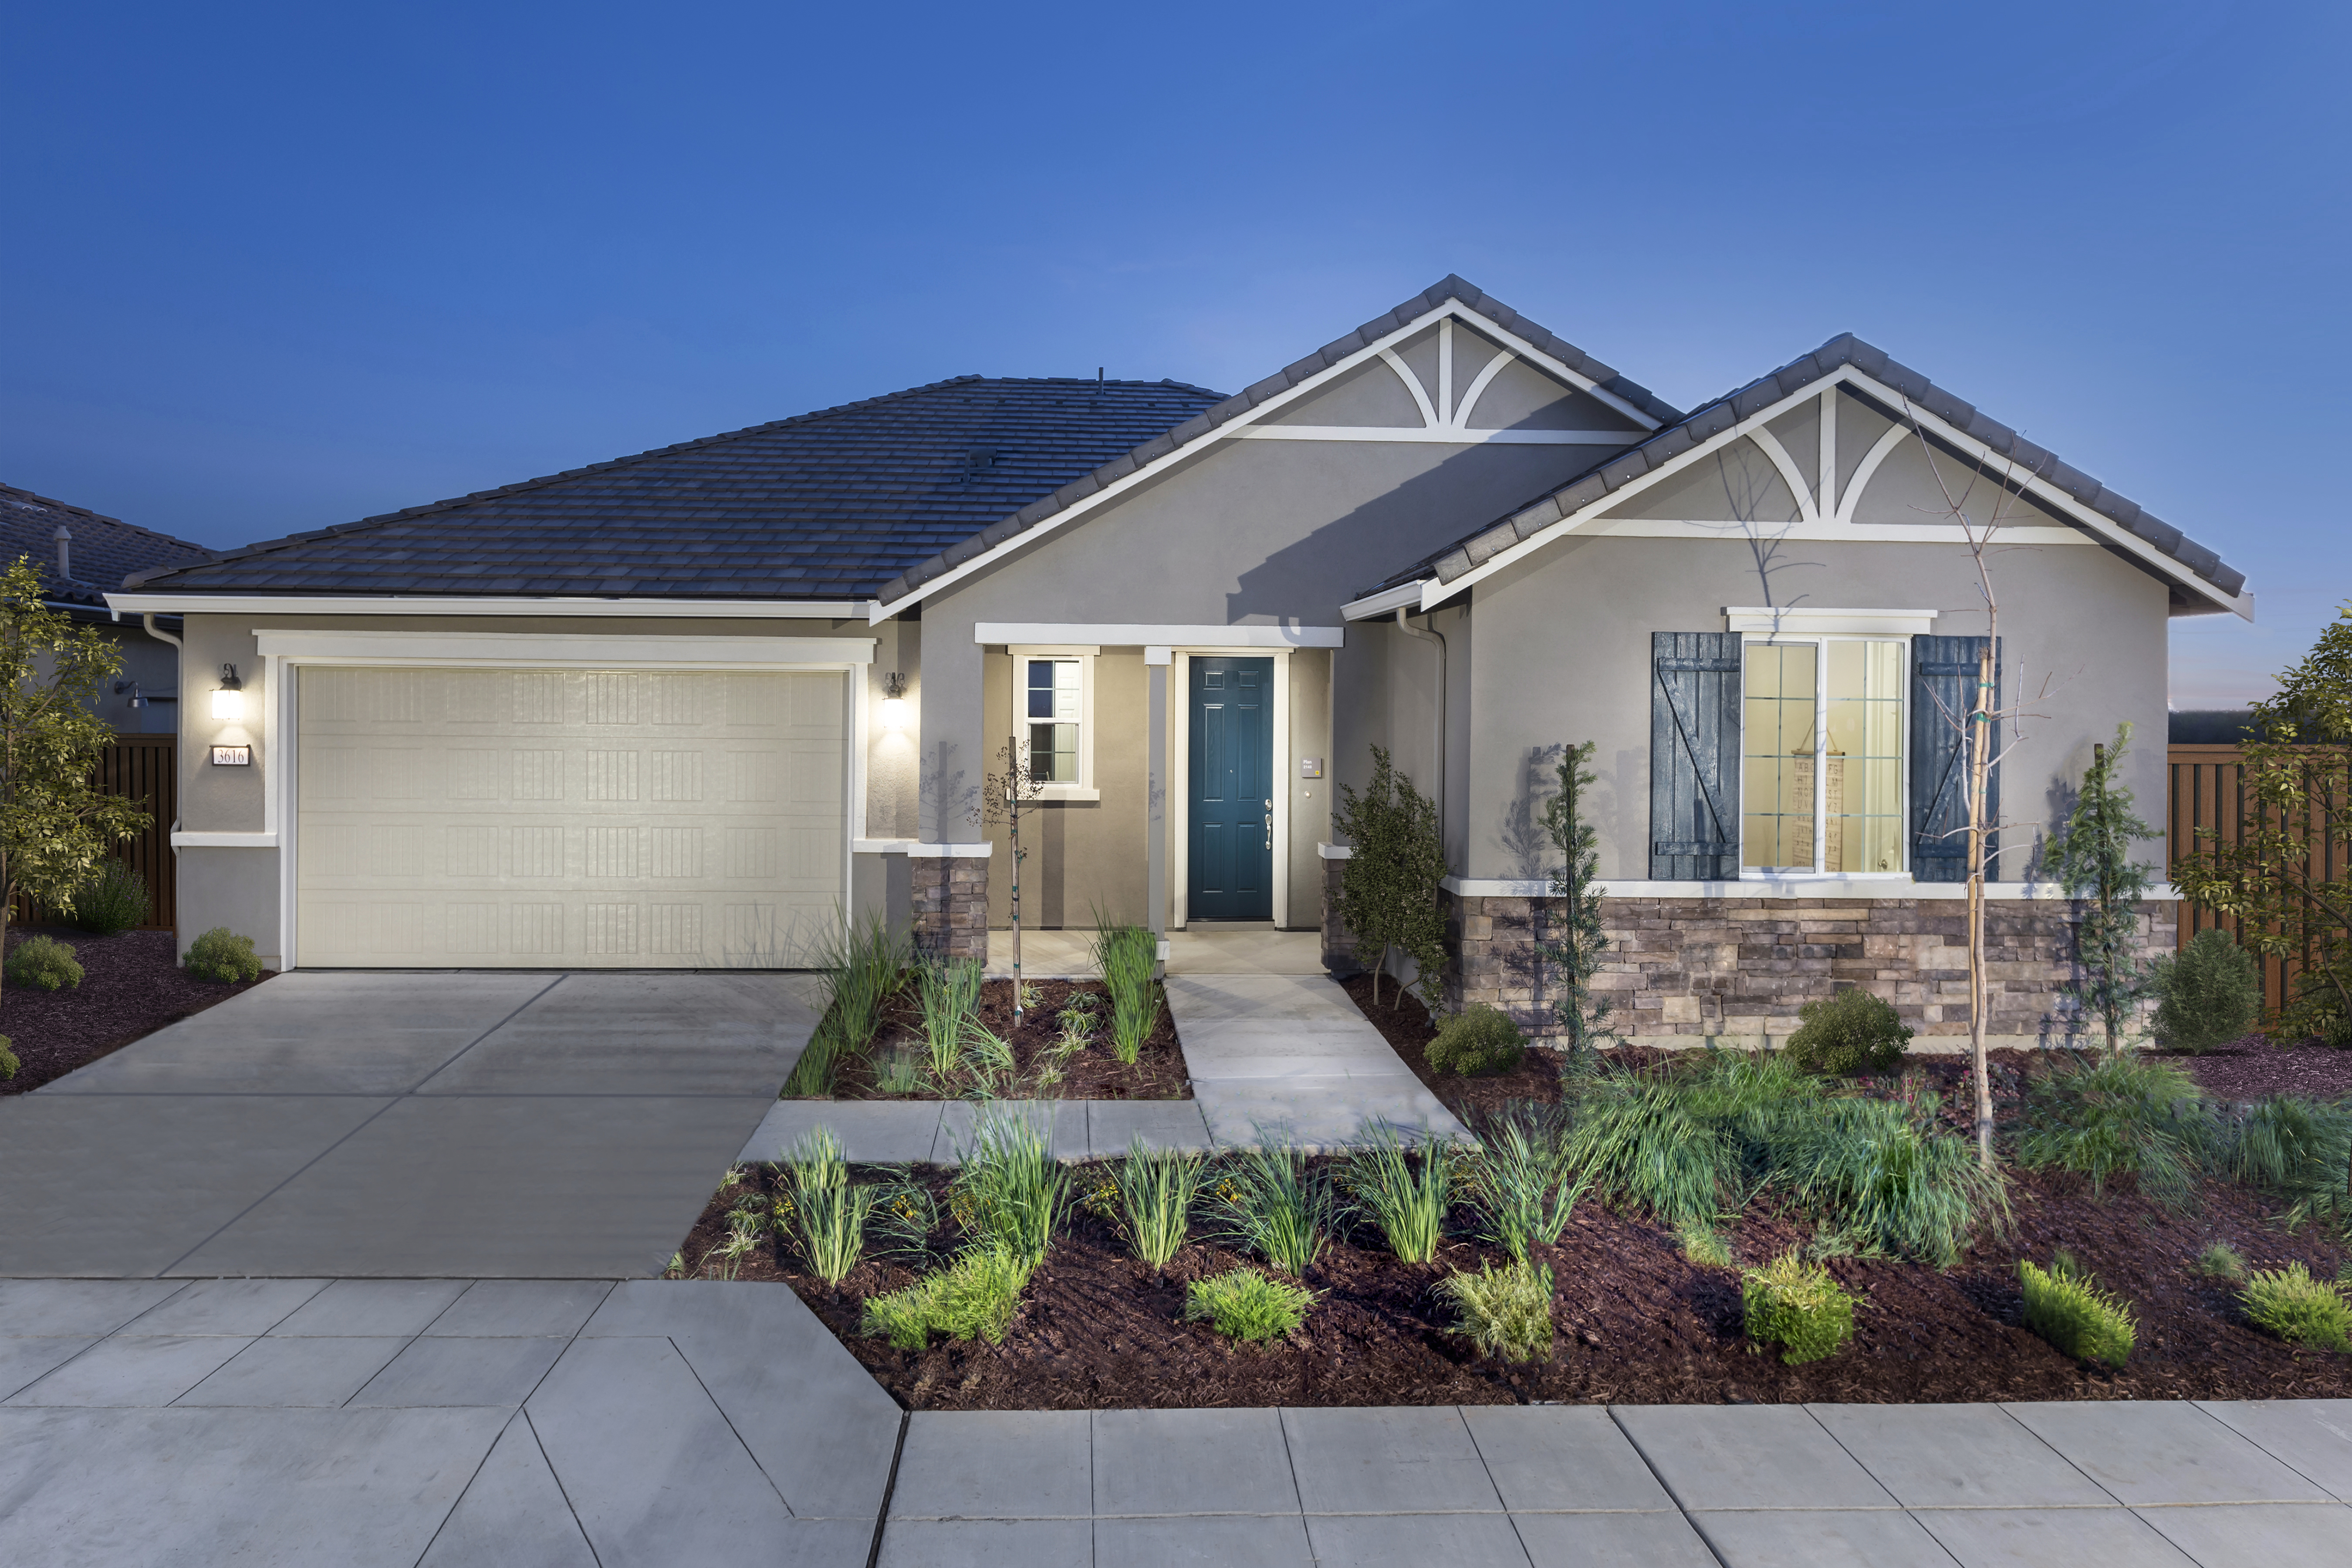 KB model home in Madera, CA